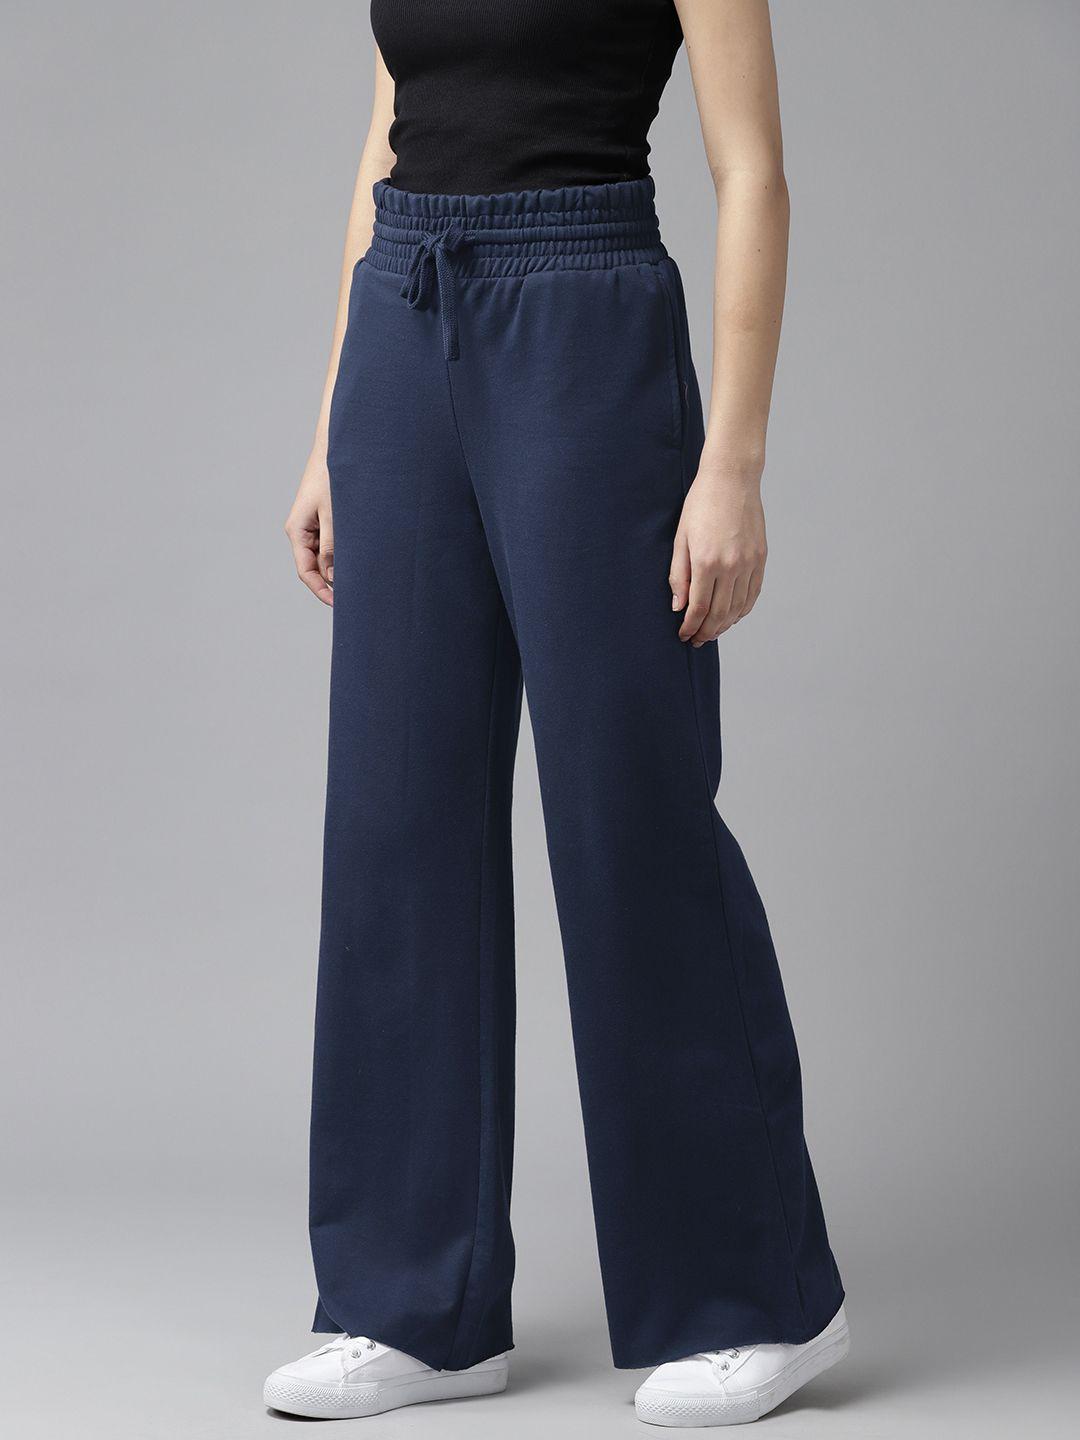 the roadster lifestyle co. women wide leg track pants